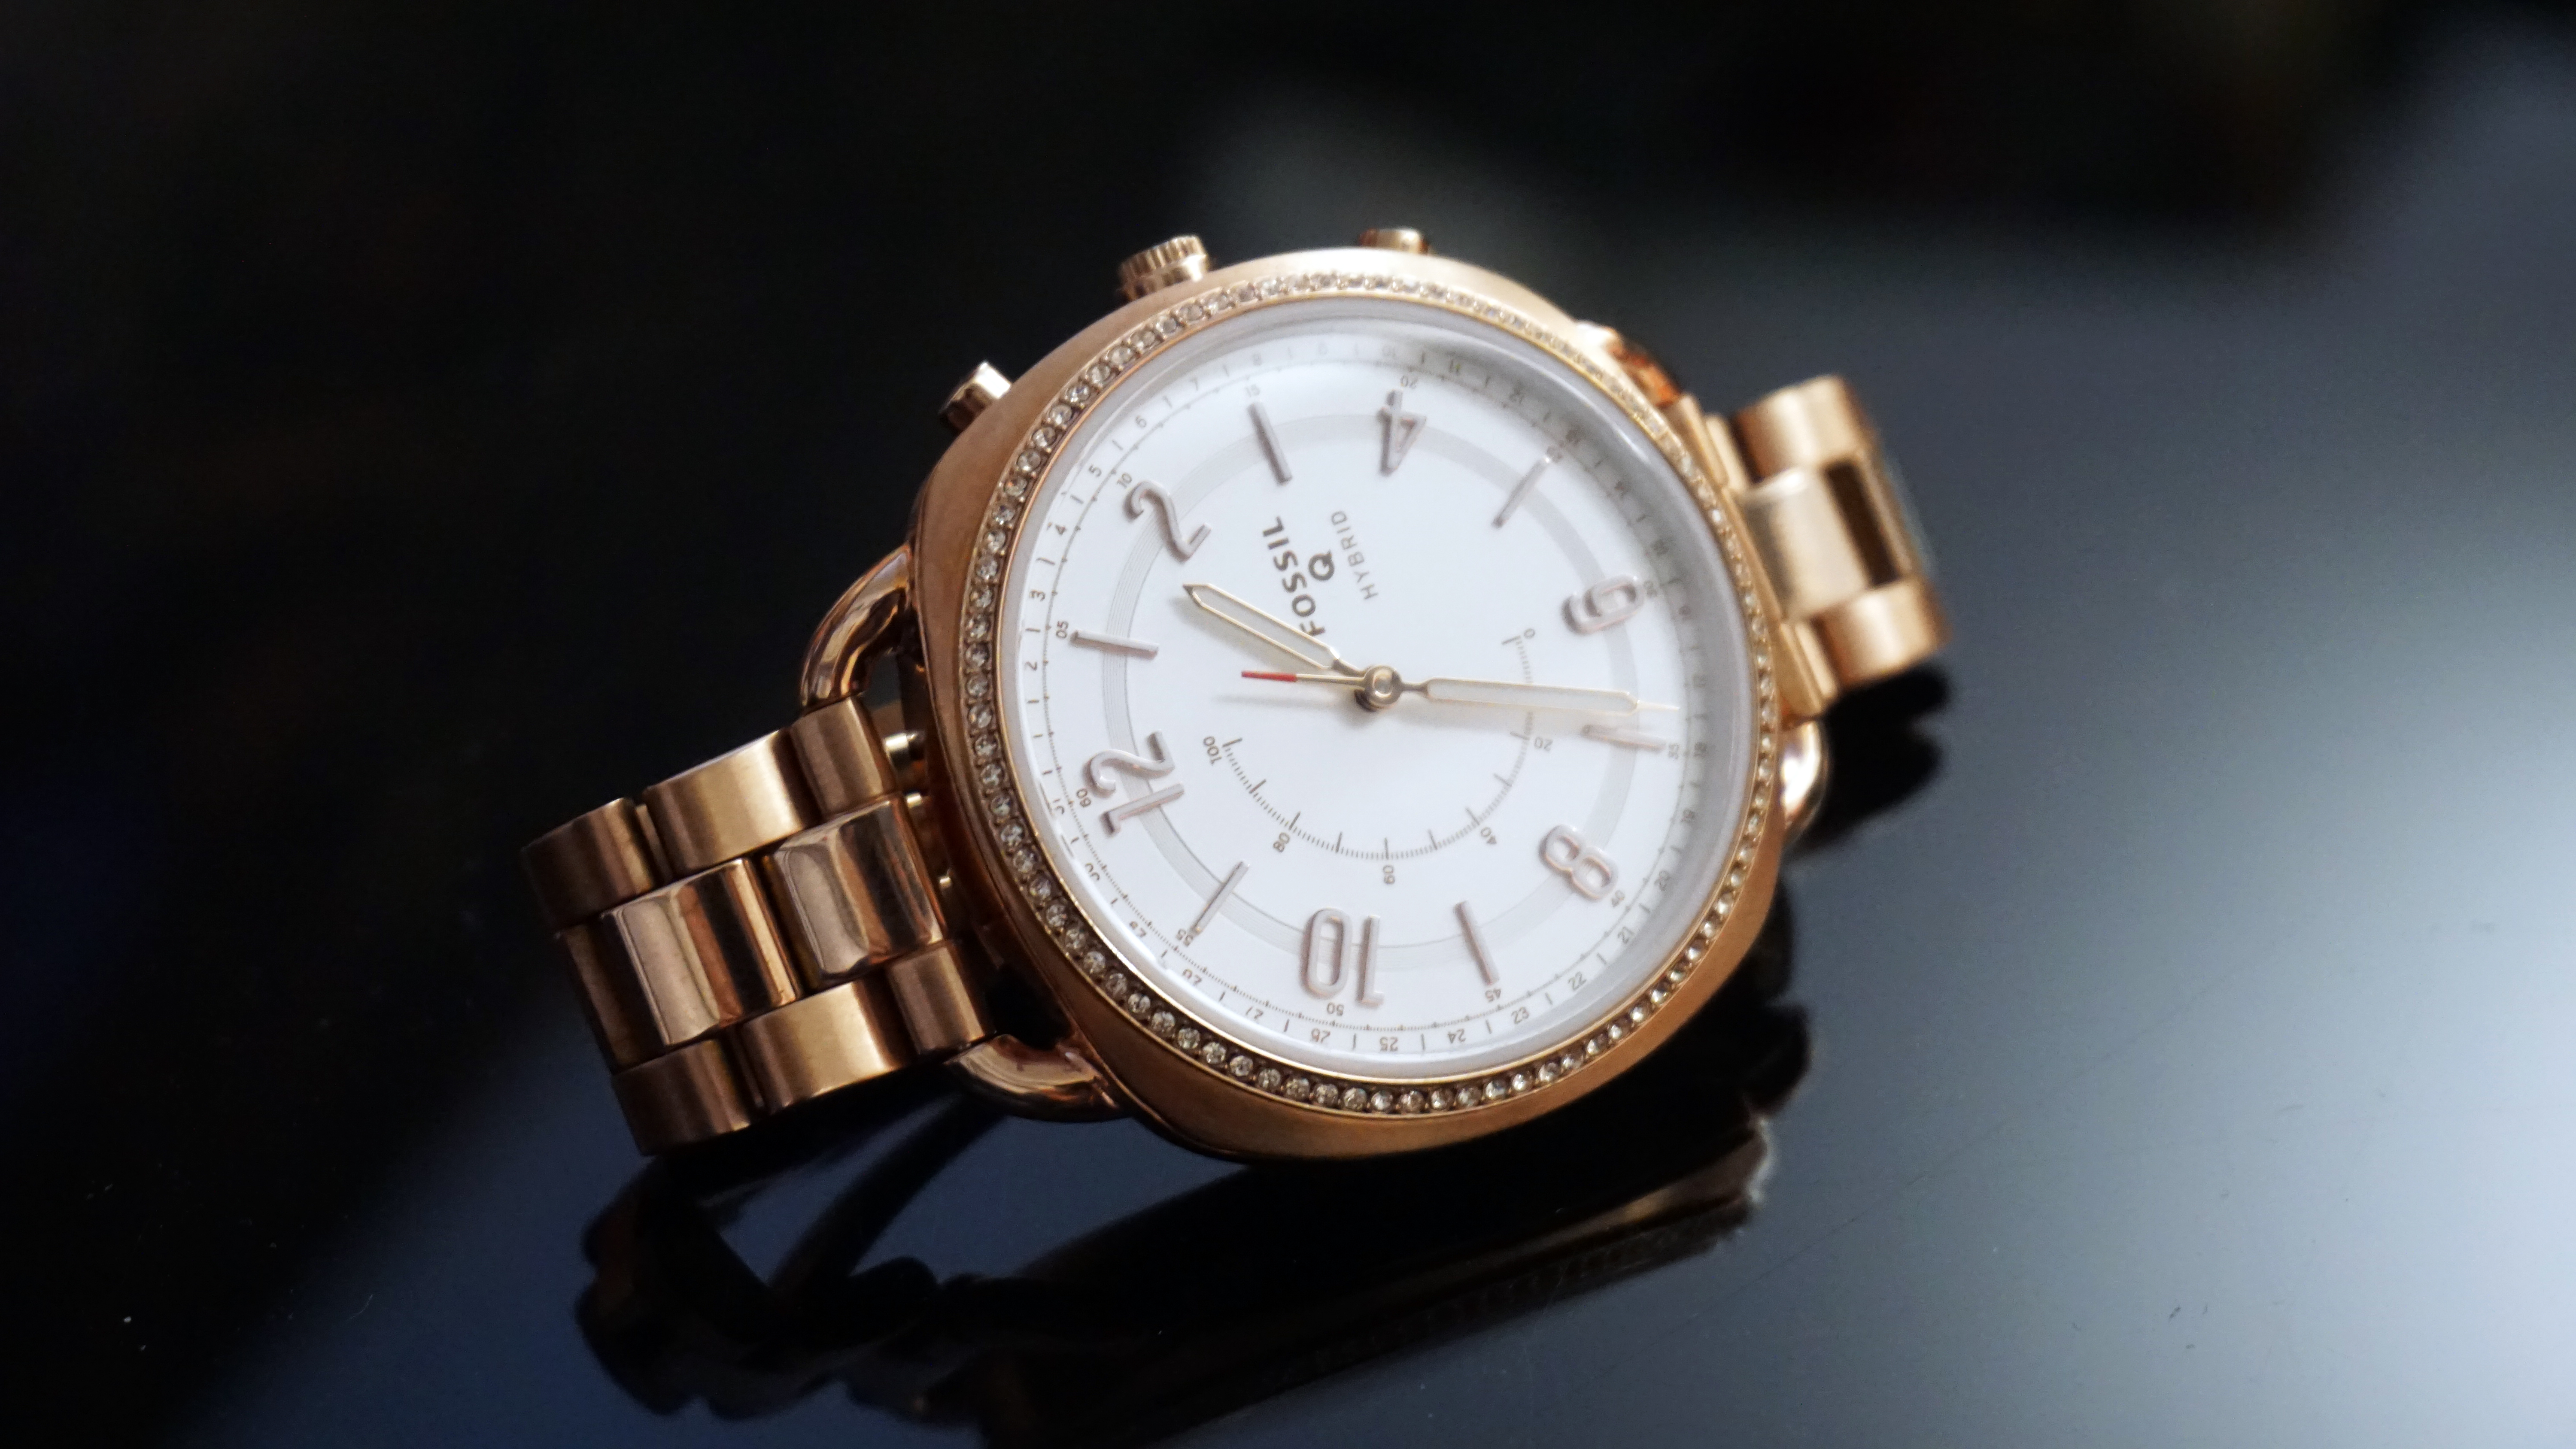 The Fossil Q Accomplice could be mistaken for a traditional, mechanical watch rather than a hybrid smartwatch.&nbsp;